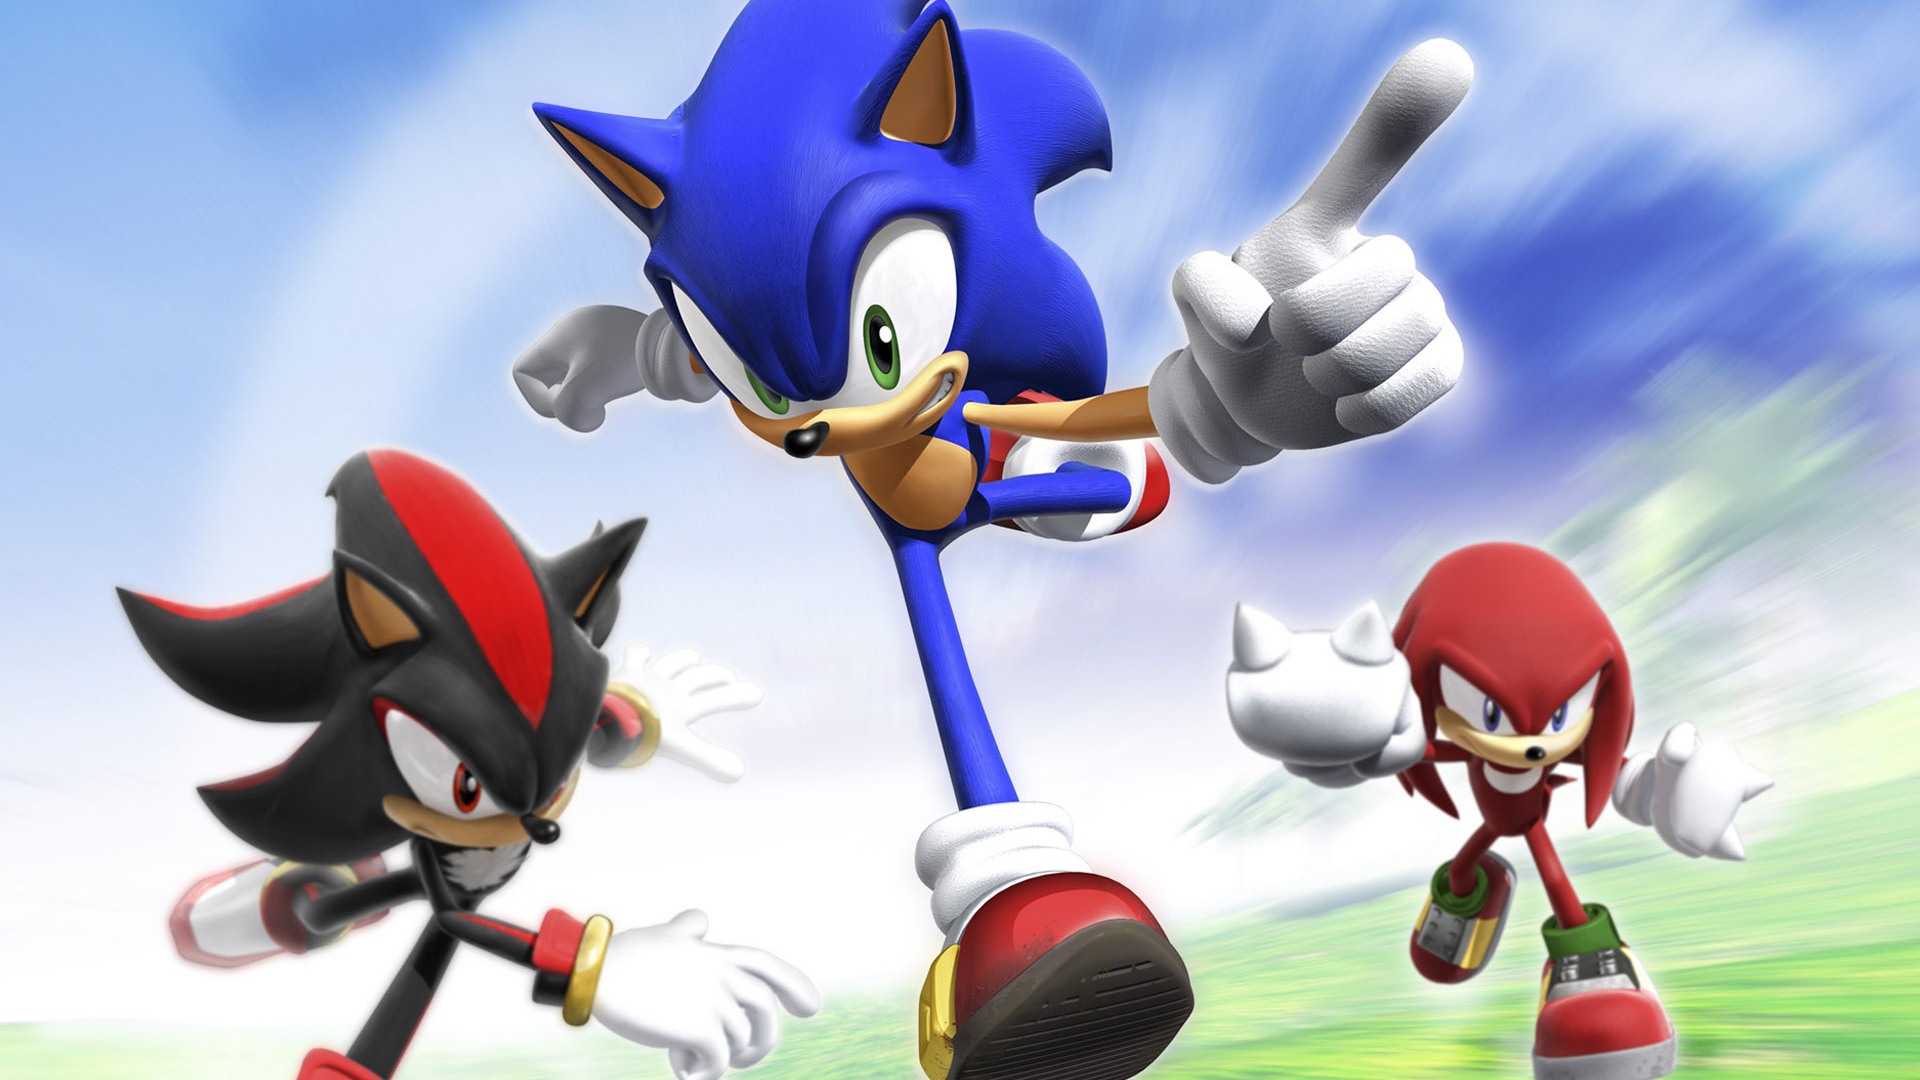 Sonic HD wallpapers #4 - 1920x1080